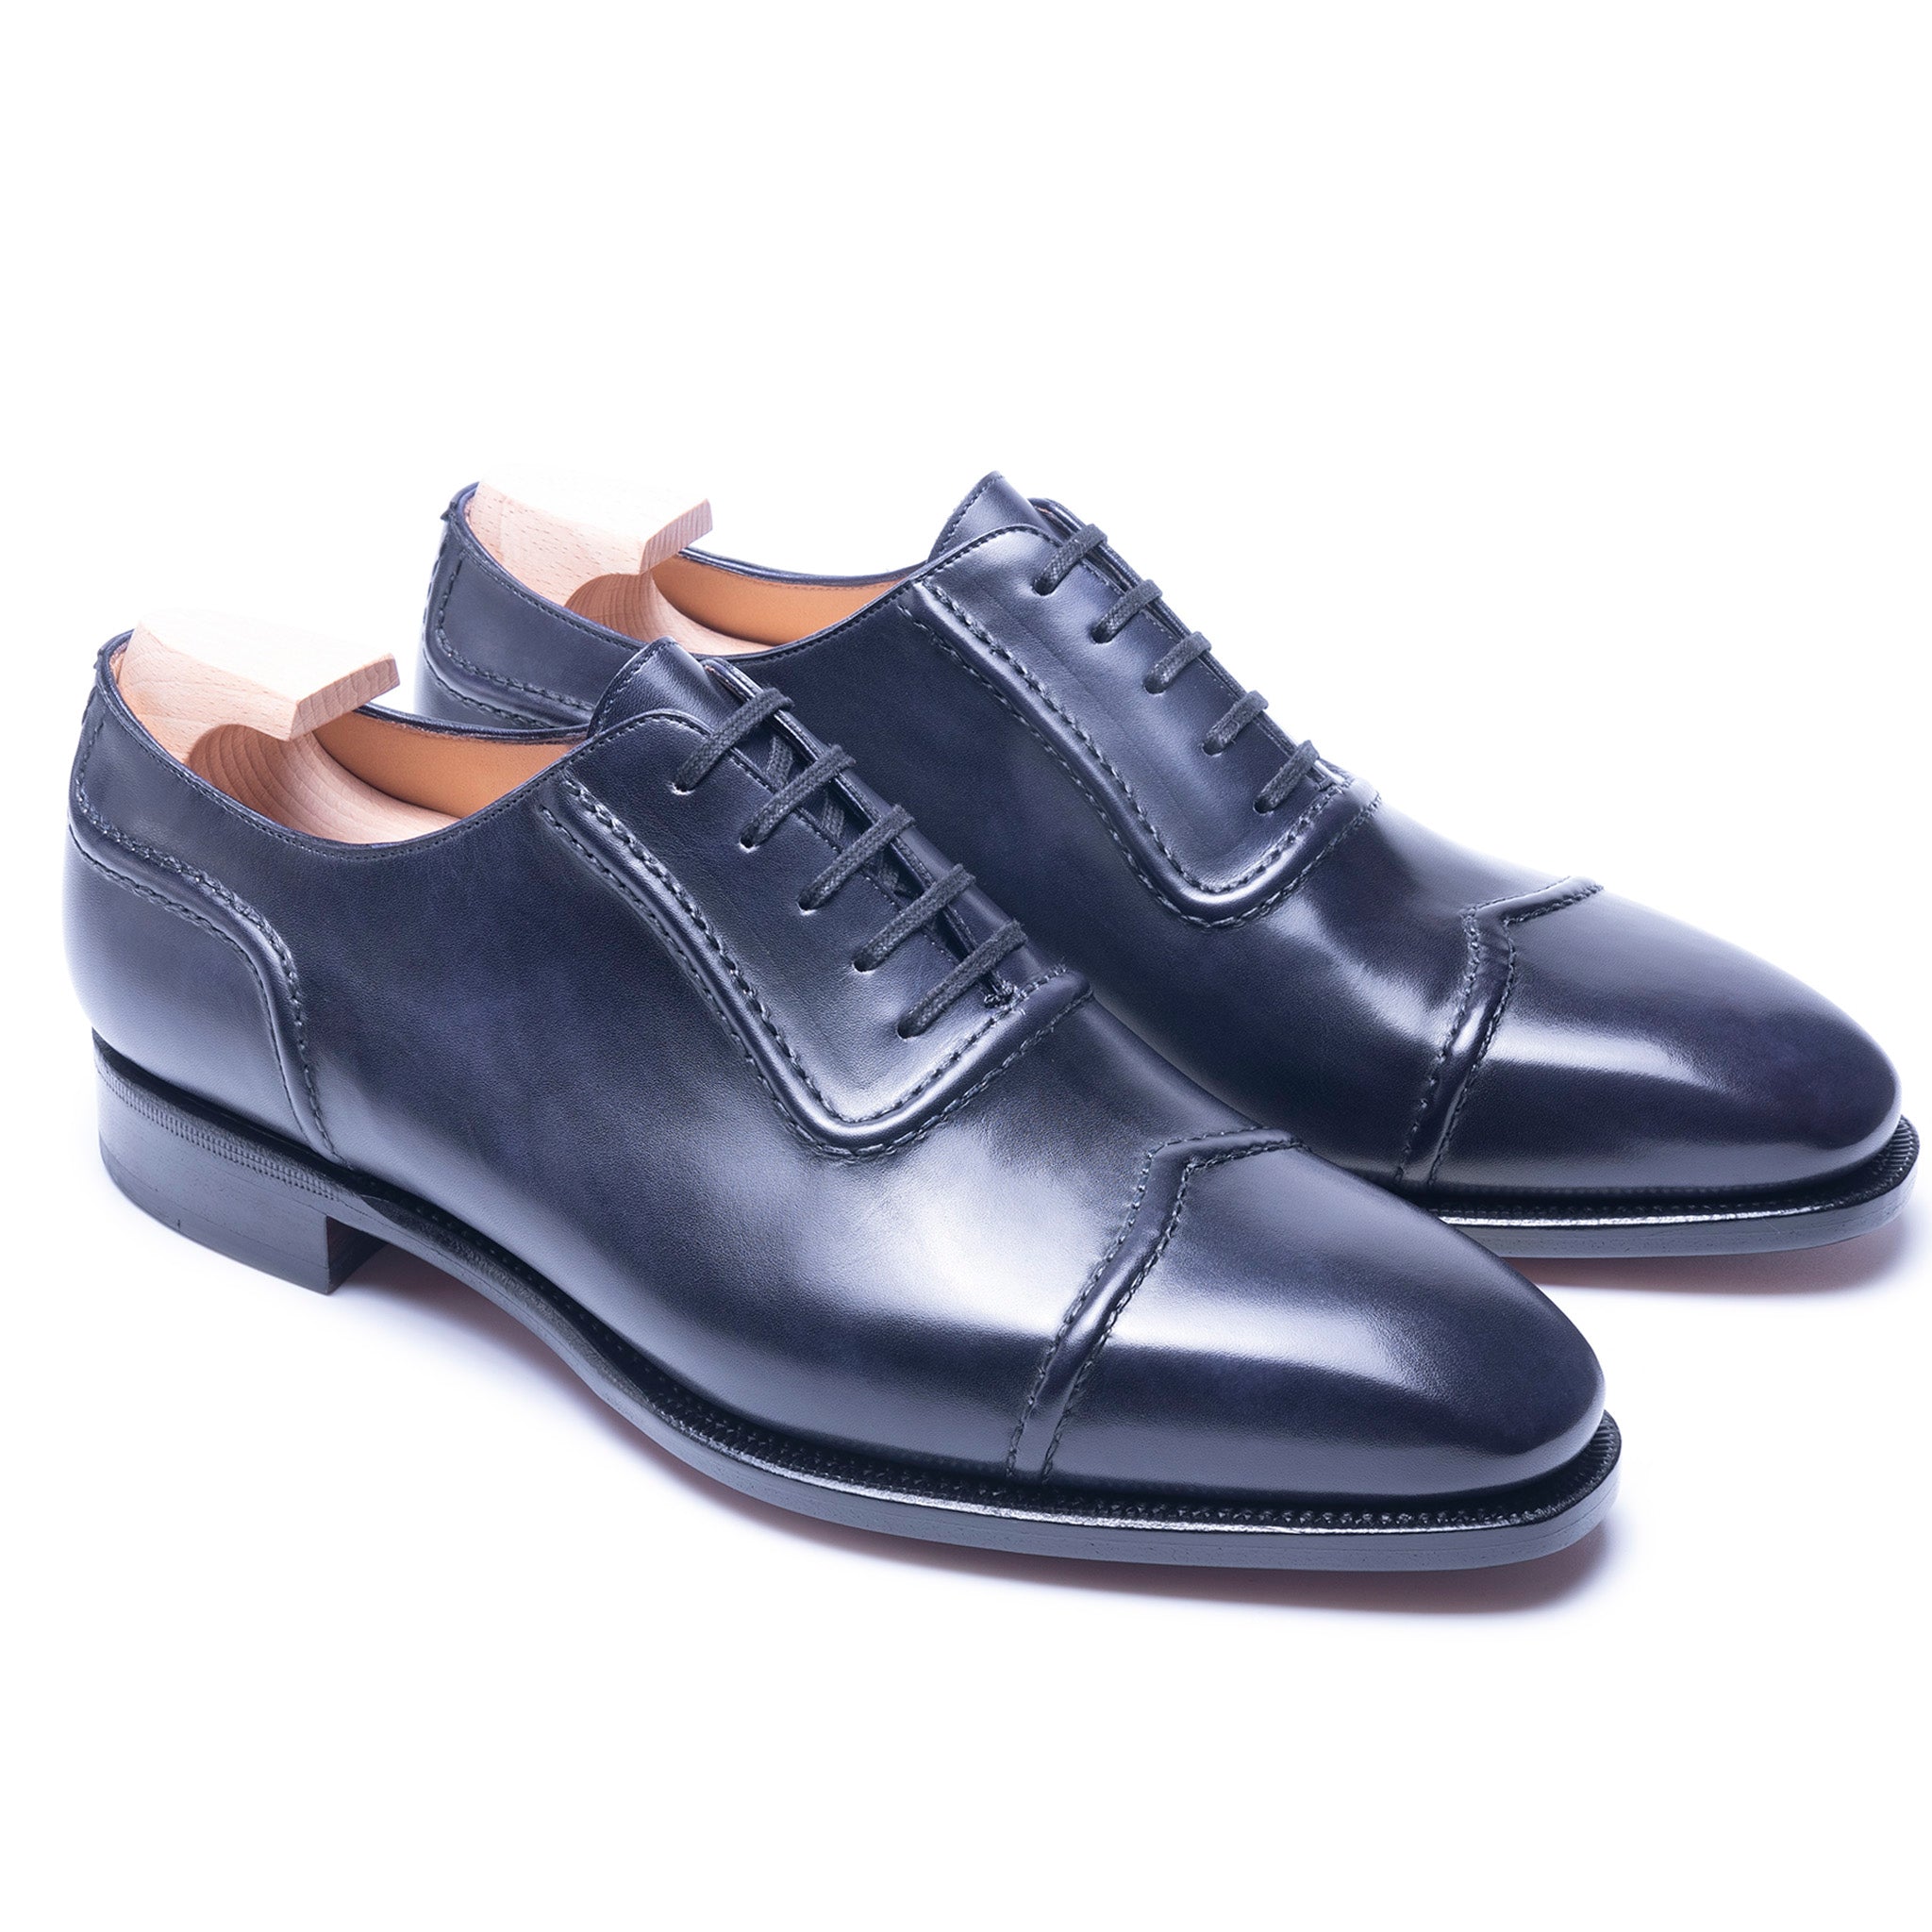 TLB Mallorca | Men's leather shoes | Oxford Shoes Artista Collection |  model Picasso vegano Navy 218